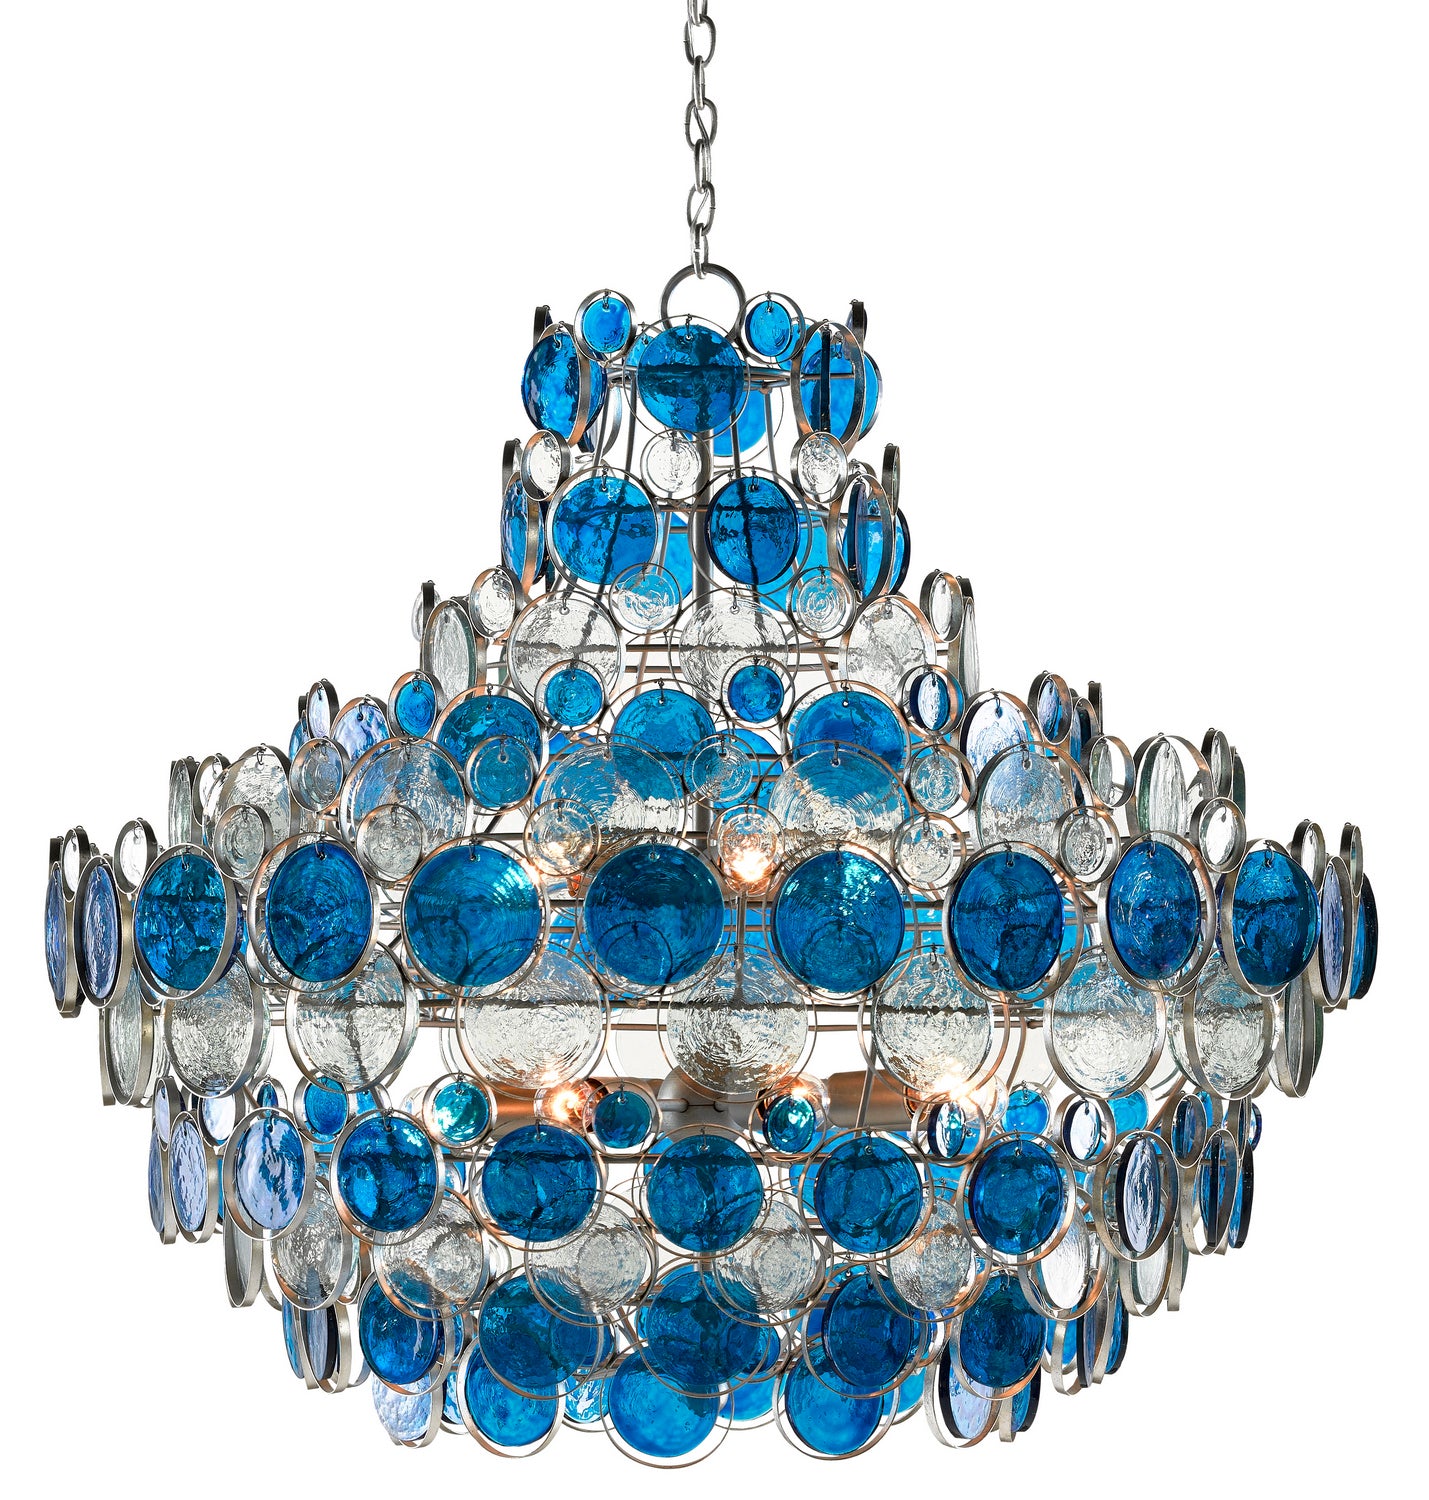 Currey and Company - 12 Light Chandelier - Galahad - Contemporary Silver Leaf/Painted Silver/Blue- Union Lighting Luminaires Decor